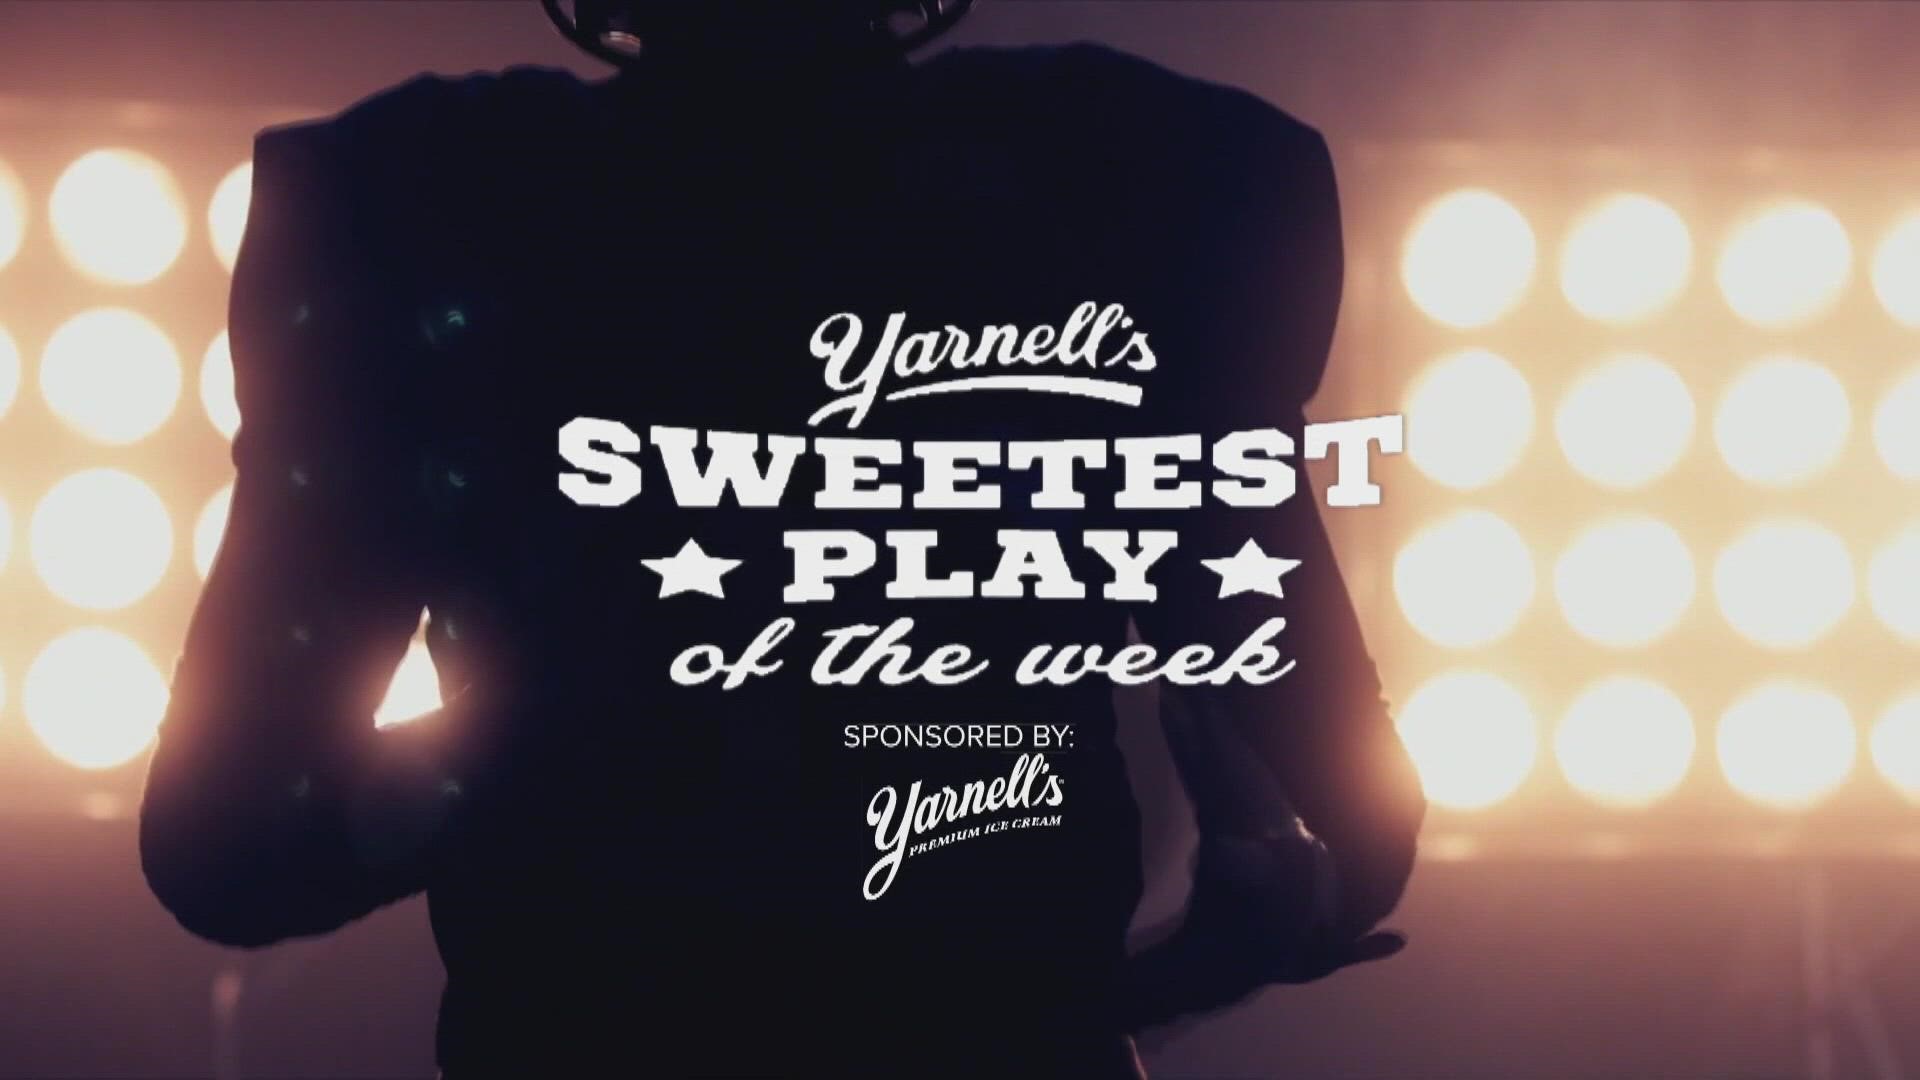 With the return of high school football in Arkansas comes the return of Yarnell's Sweetest Play of the Week!